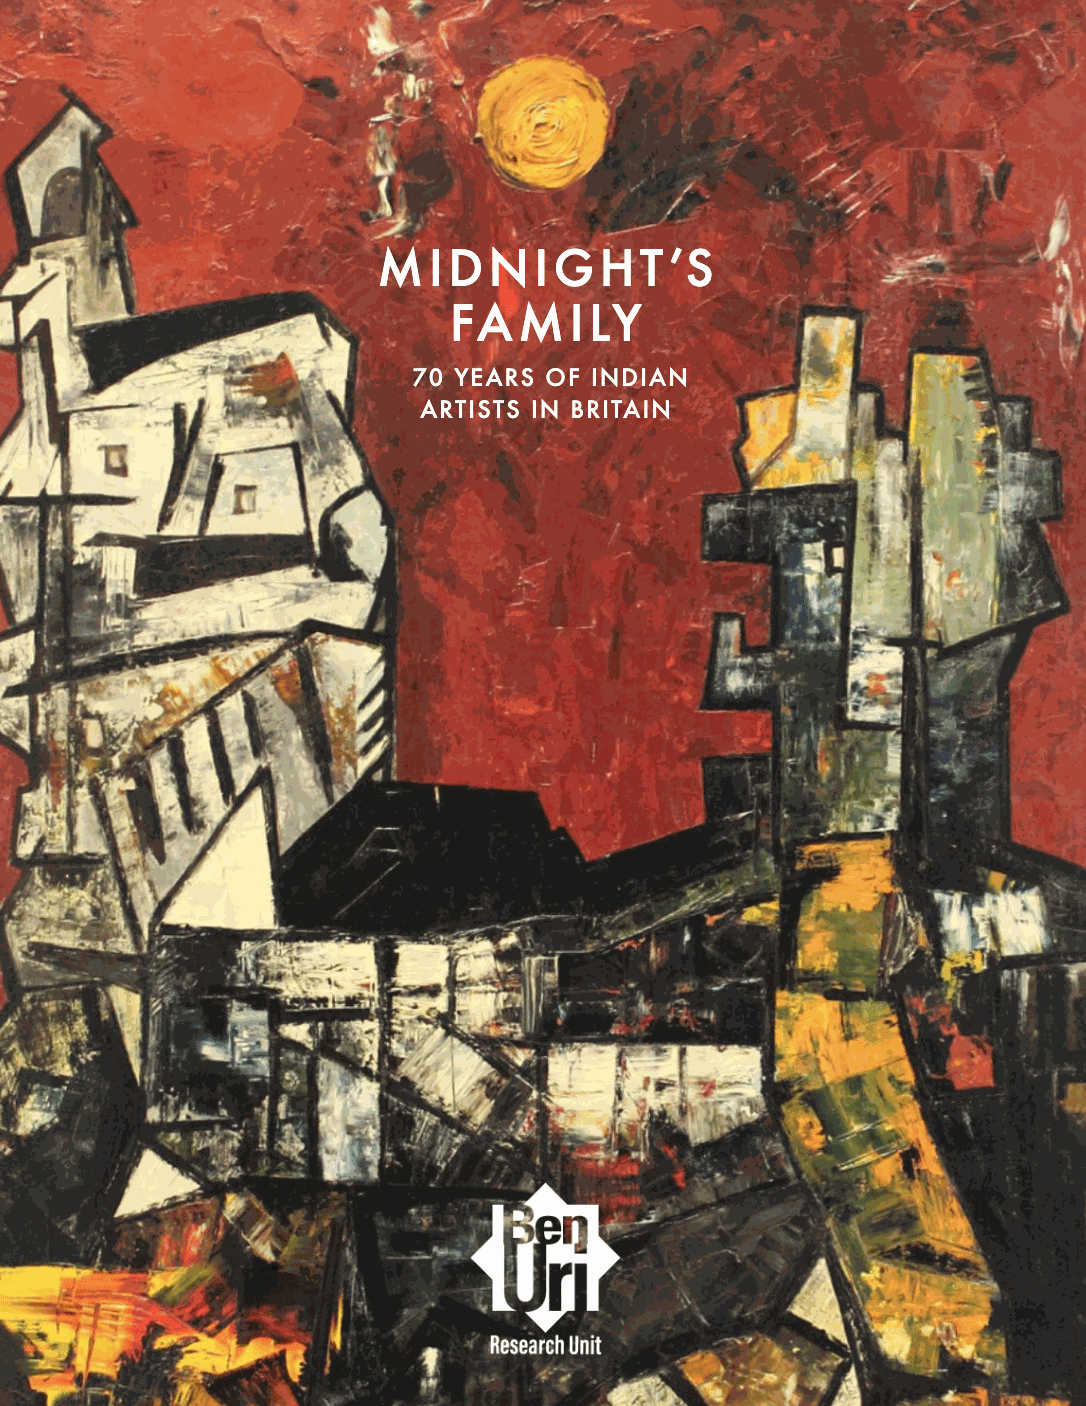 Midnight's Family 70 years of Indian Artists in Britain Read it here